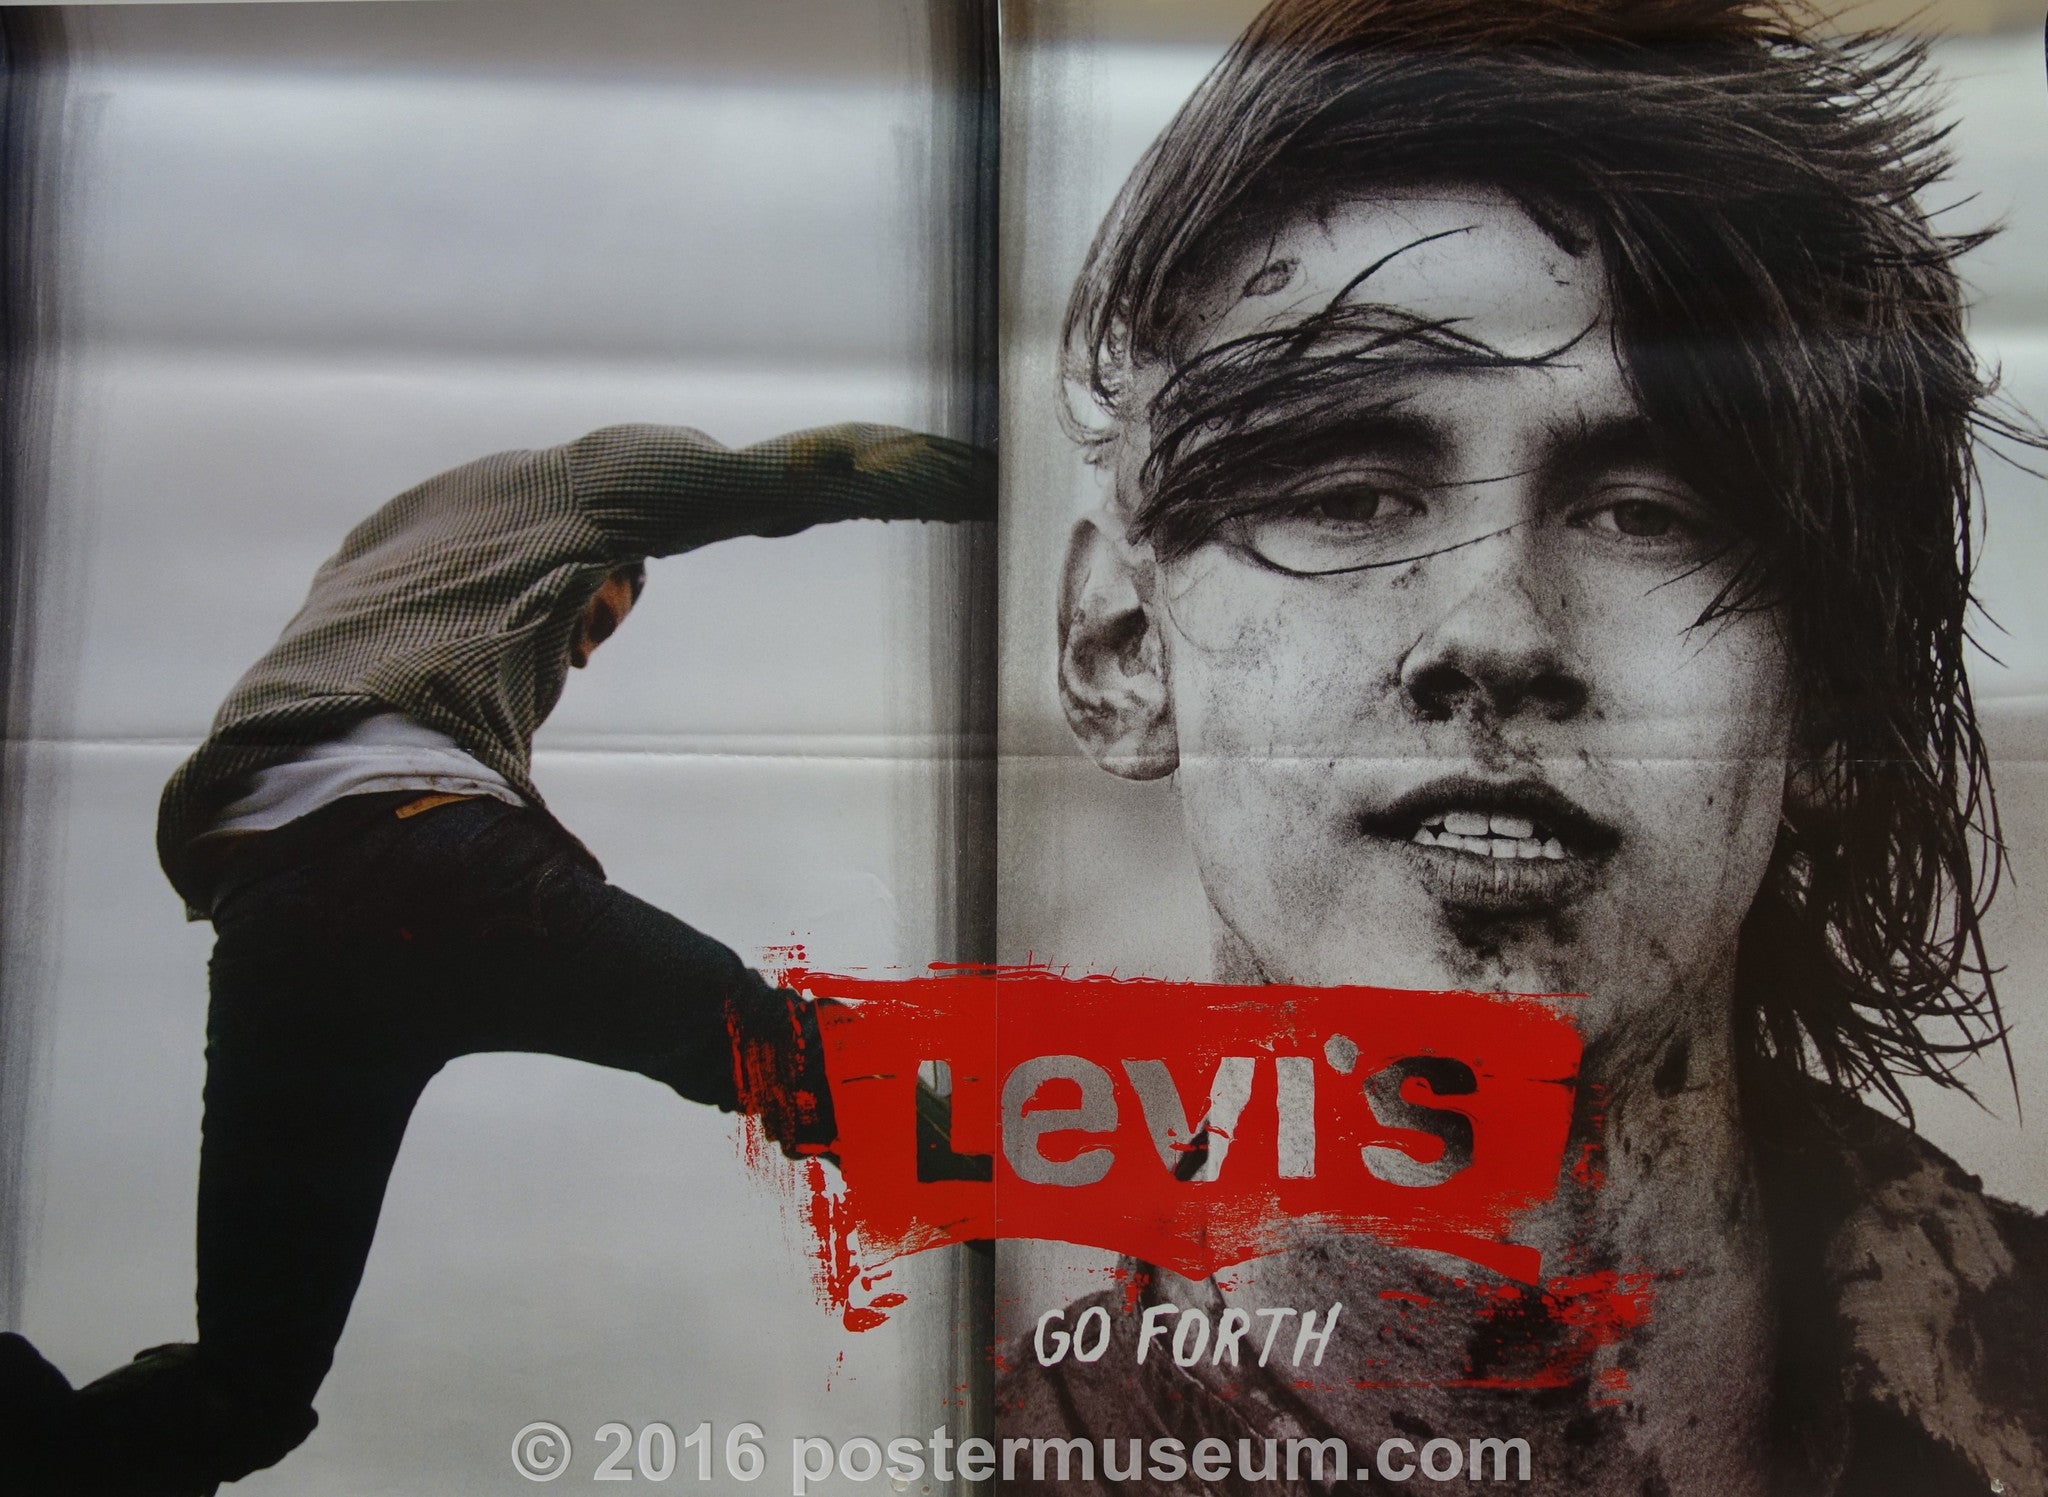 Levi's Go Forth – Poster Museum